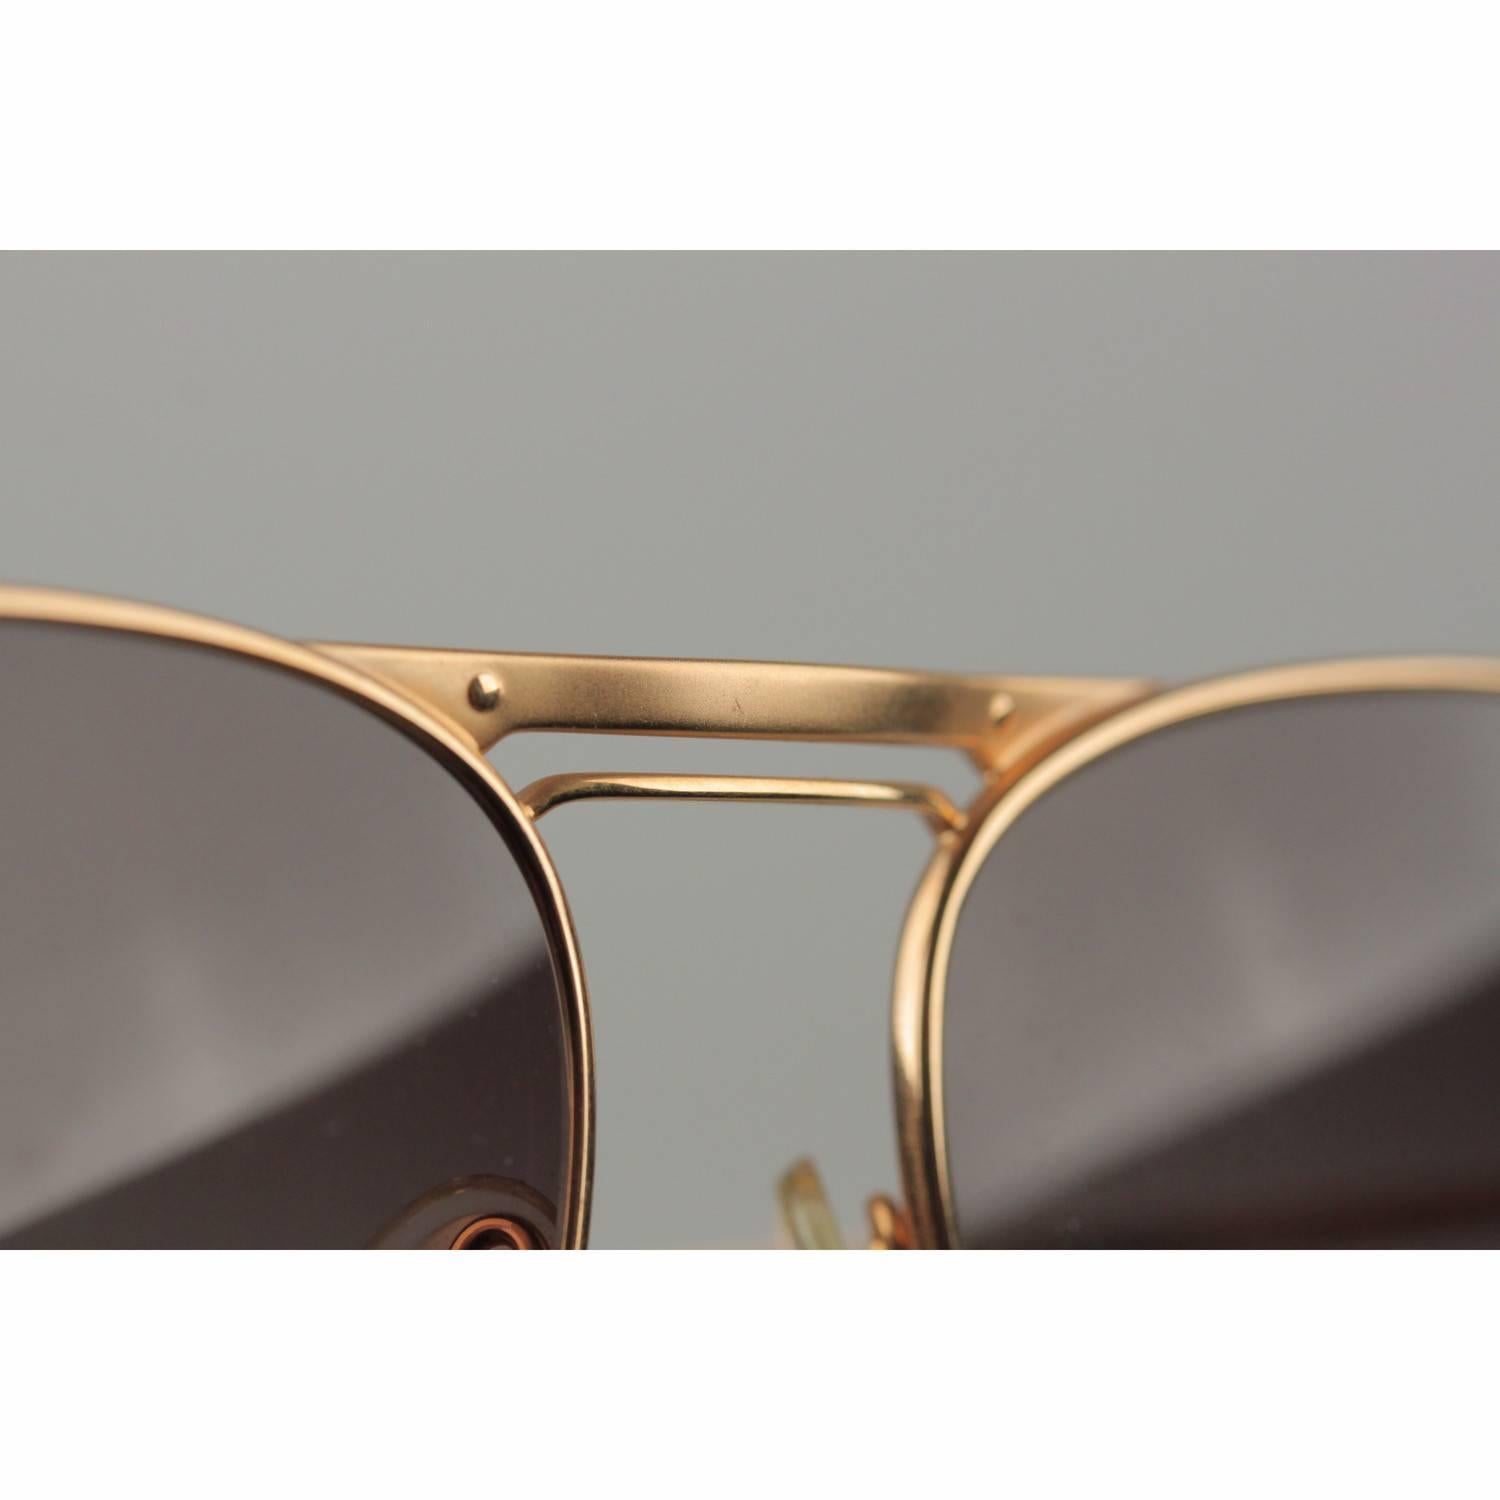 Silhouette Vintage Aviator Gold Metal Sunglasses M7019 58/16 135 mm For Sale 1